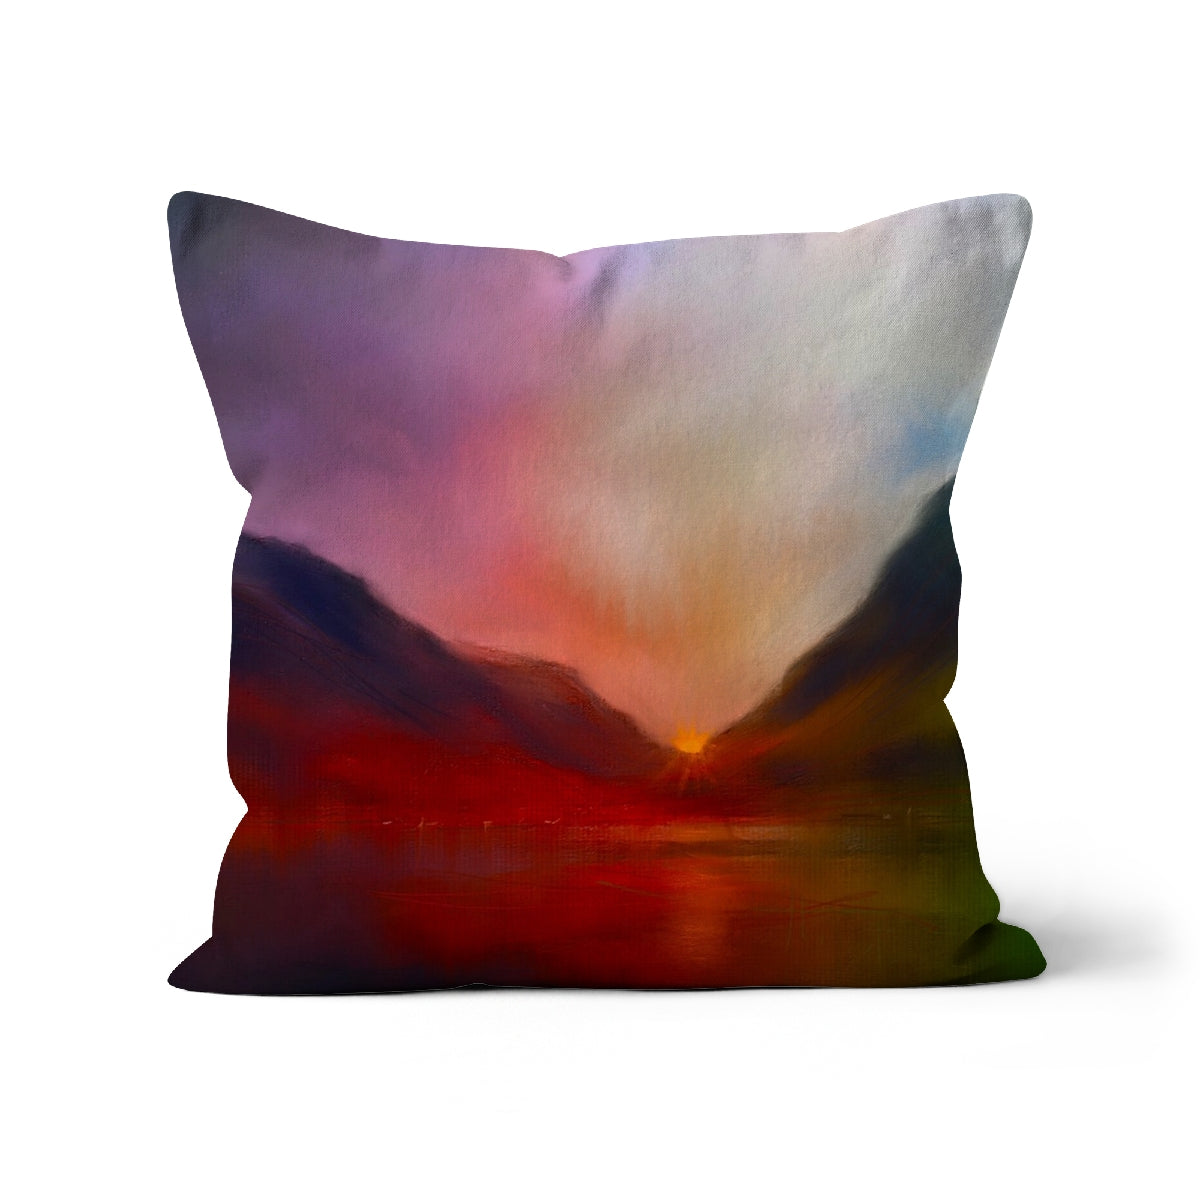 Glencoe Sunset Art Gifts Cushion-Cushions-Glencoe Art Gallery-Faux Suede-18"x18"-Paintings, Prints, Homeware, Art Gifts From Scotland By Scottish Artist Kevin Hunter